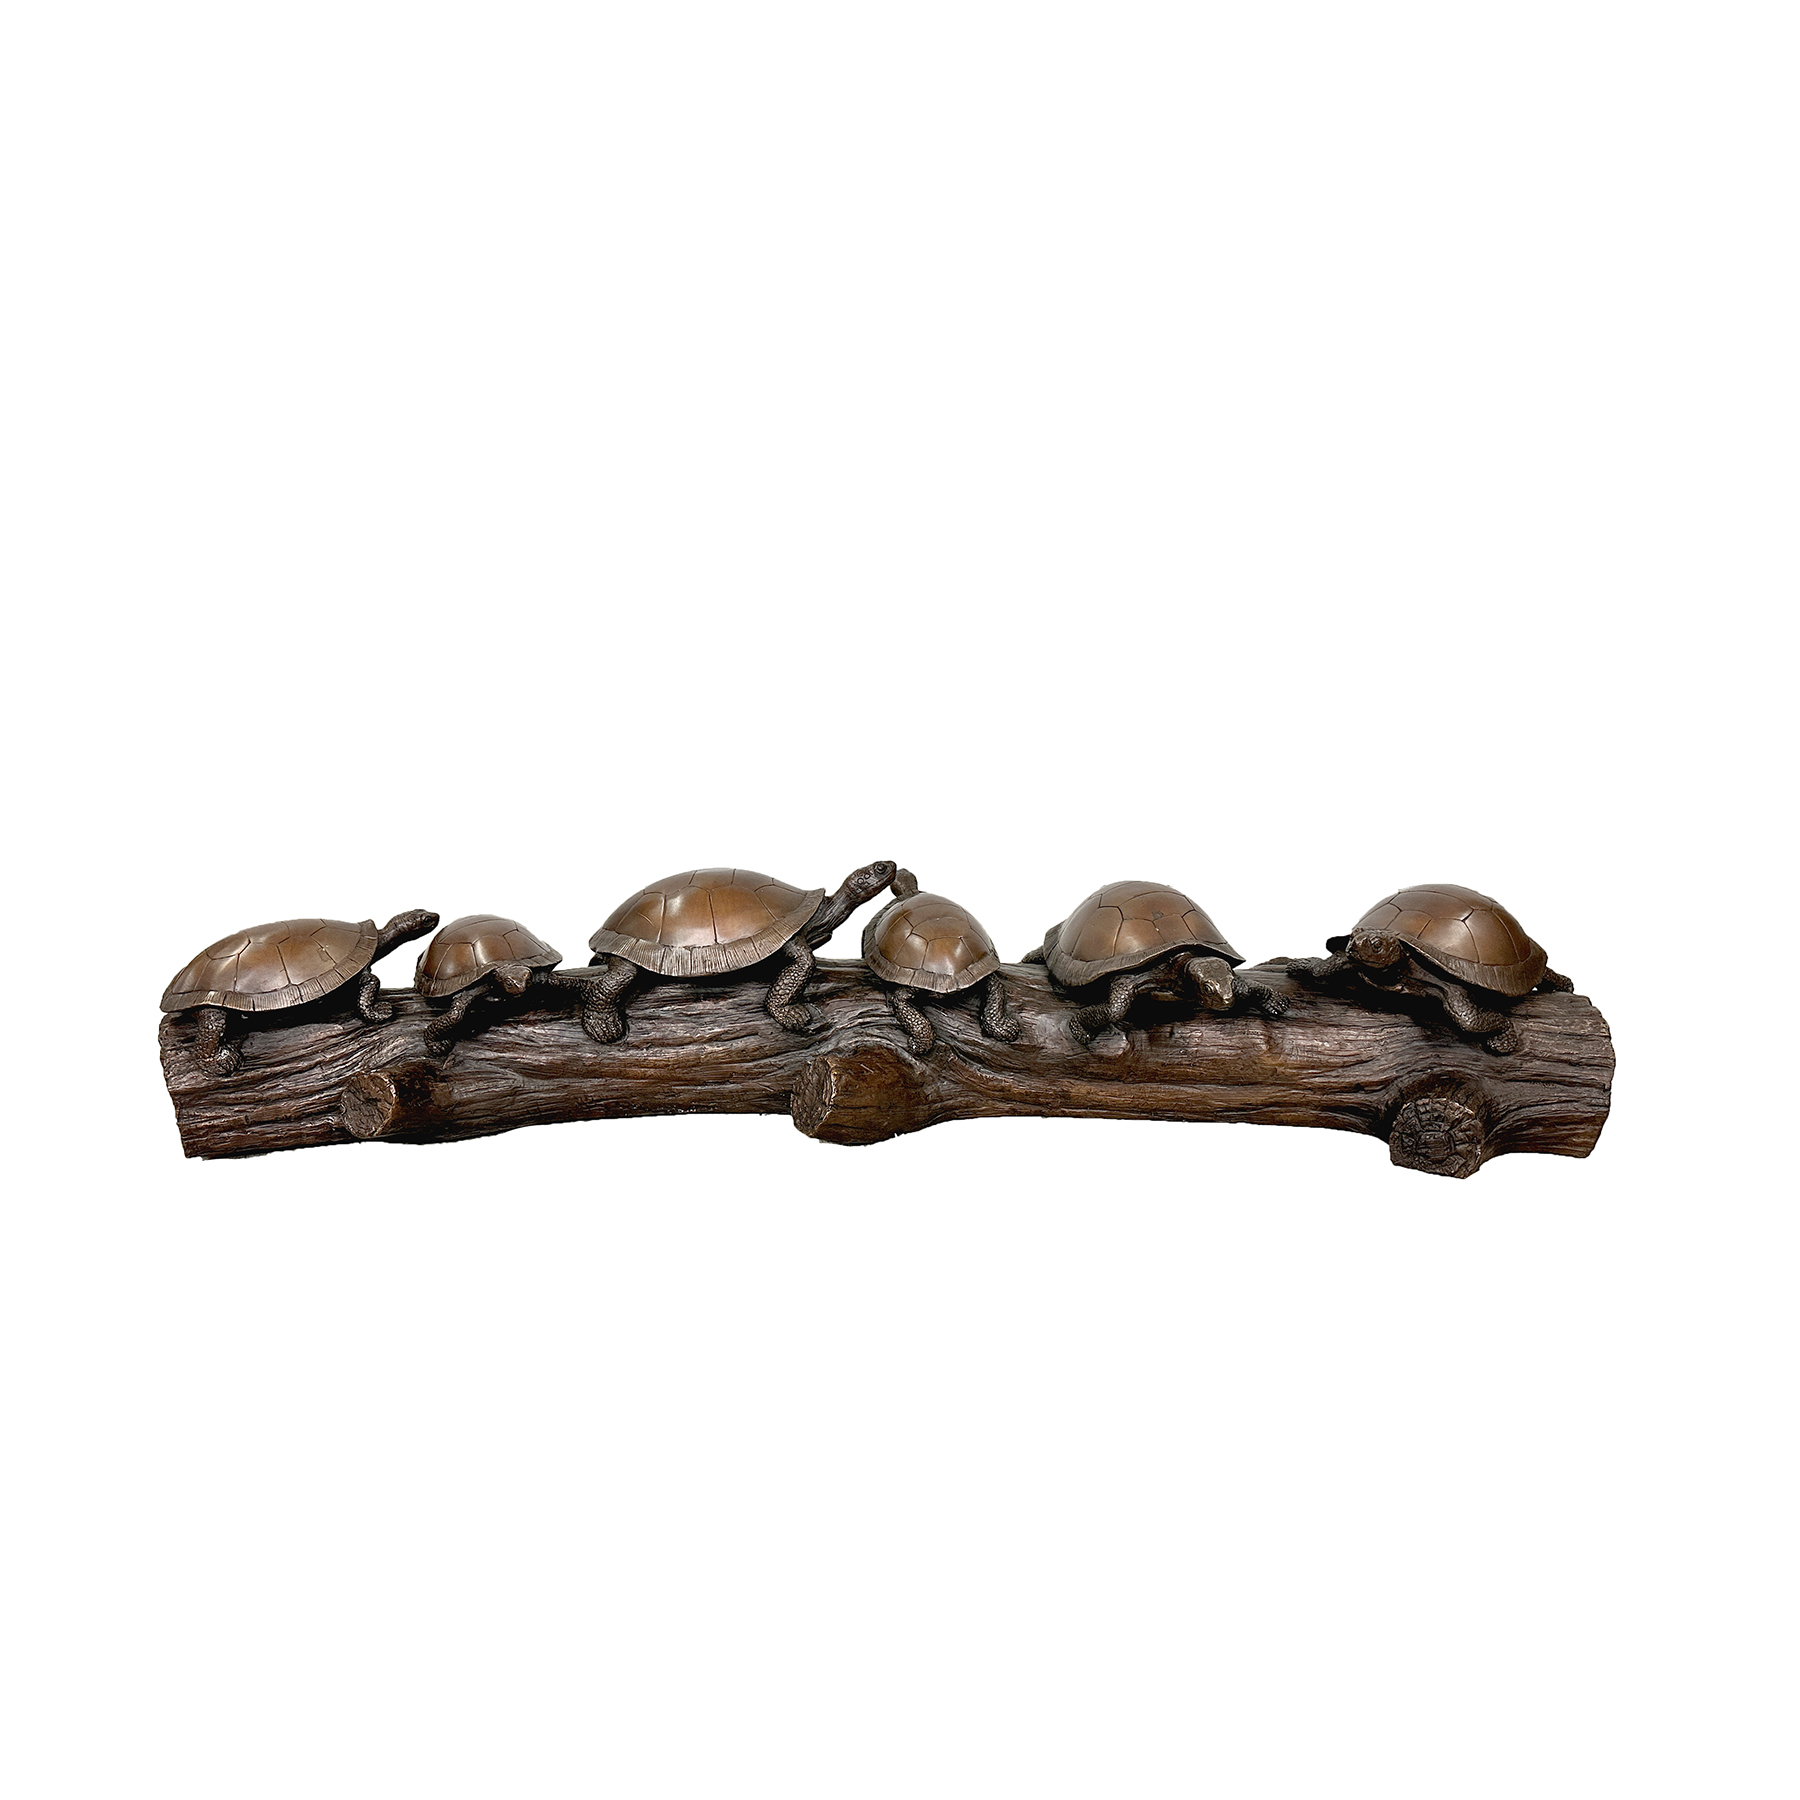 SRB40009 Bronze Six Turtles on Log Sculpture exclsively designed and produced by Metropolitan Galleries Inc